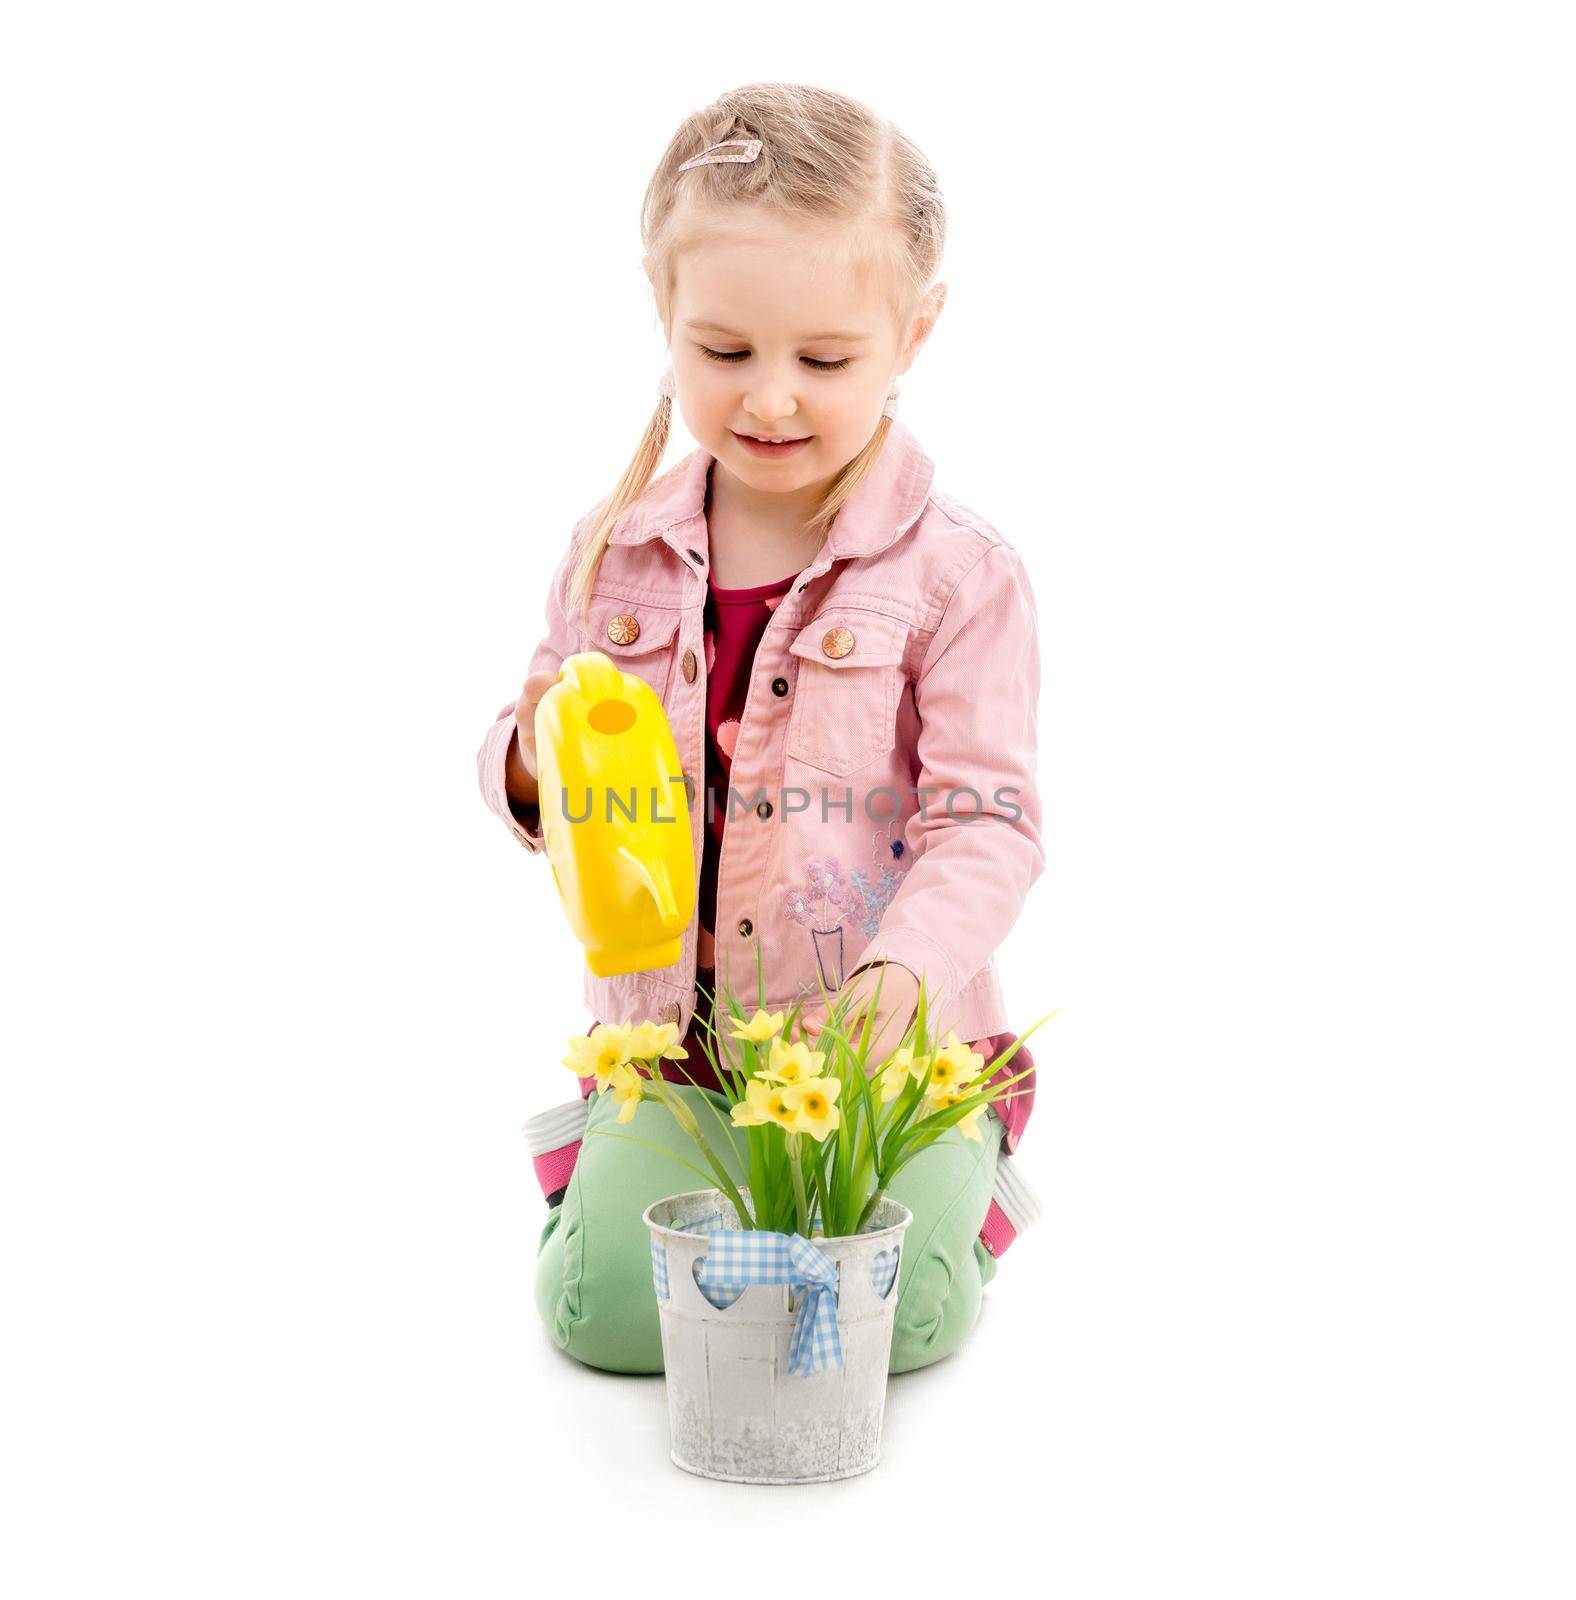 kid watering flowers, isolated on white background by tan4ikk1